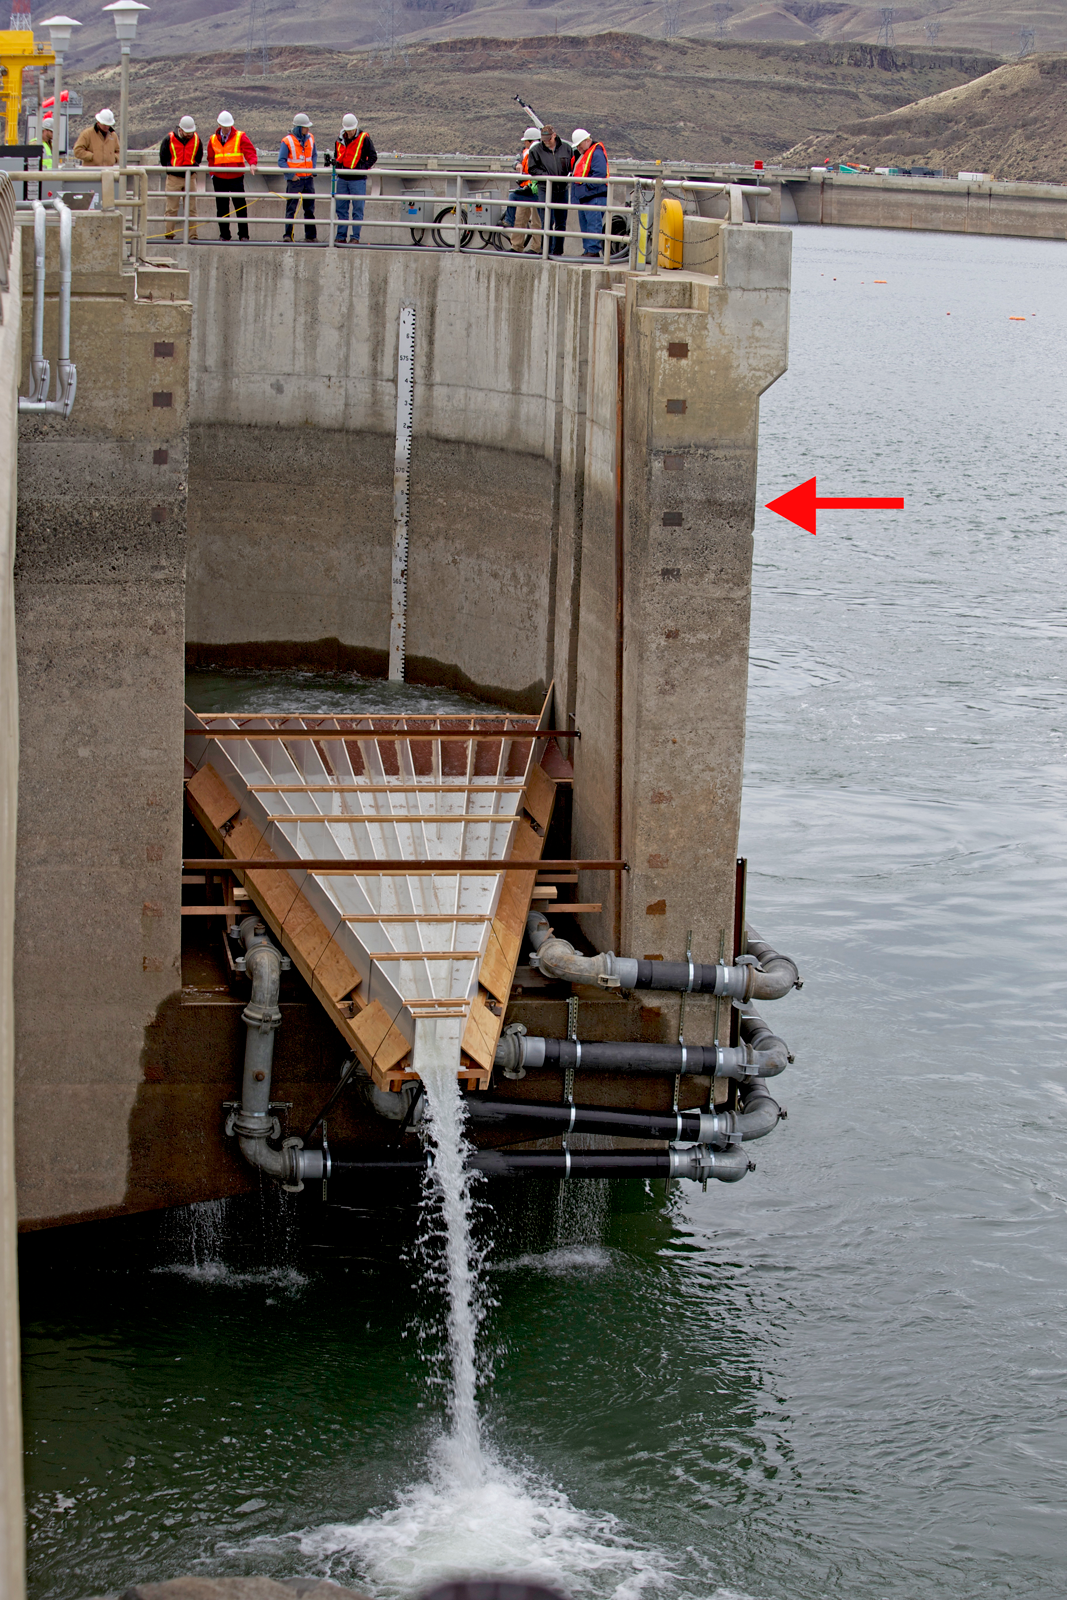 The Wanapum Dam fish ladder exit with a temporary fix that sends adult fish down a ramp into the water below. The red arrow indicates the normal reservoir level.